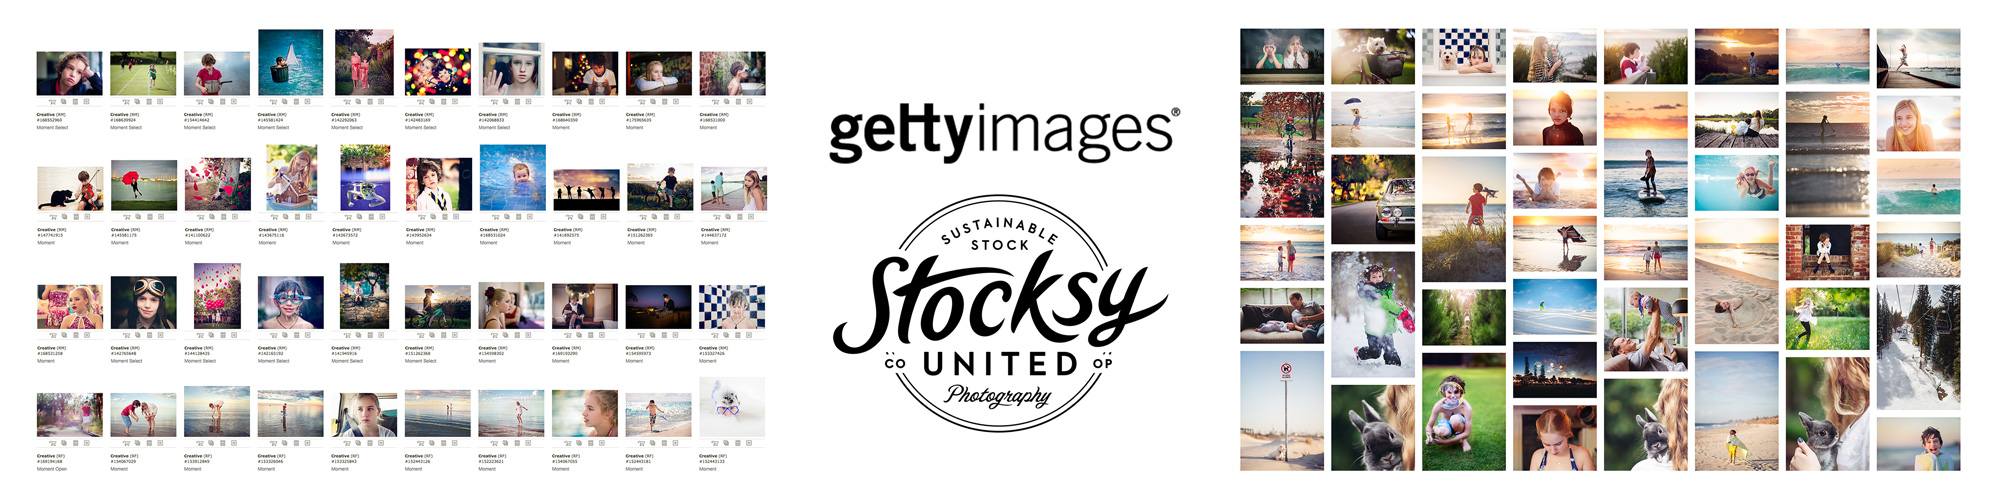 Angela Lumsden license images at Getty and Stocksy